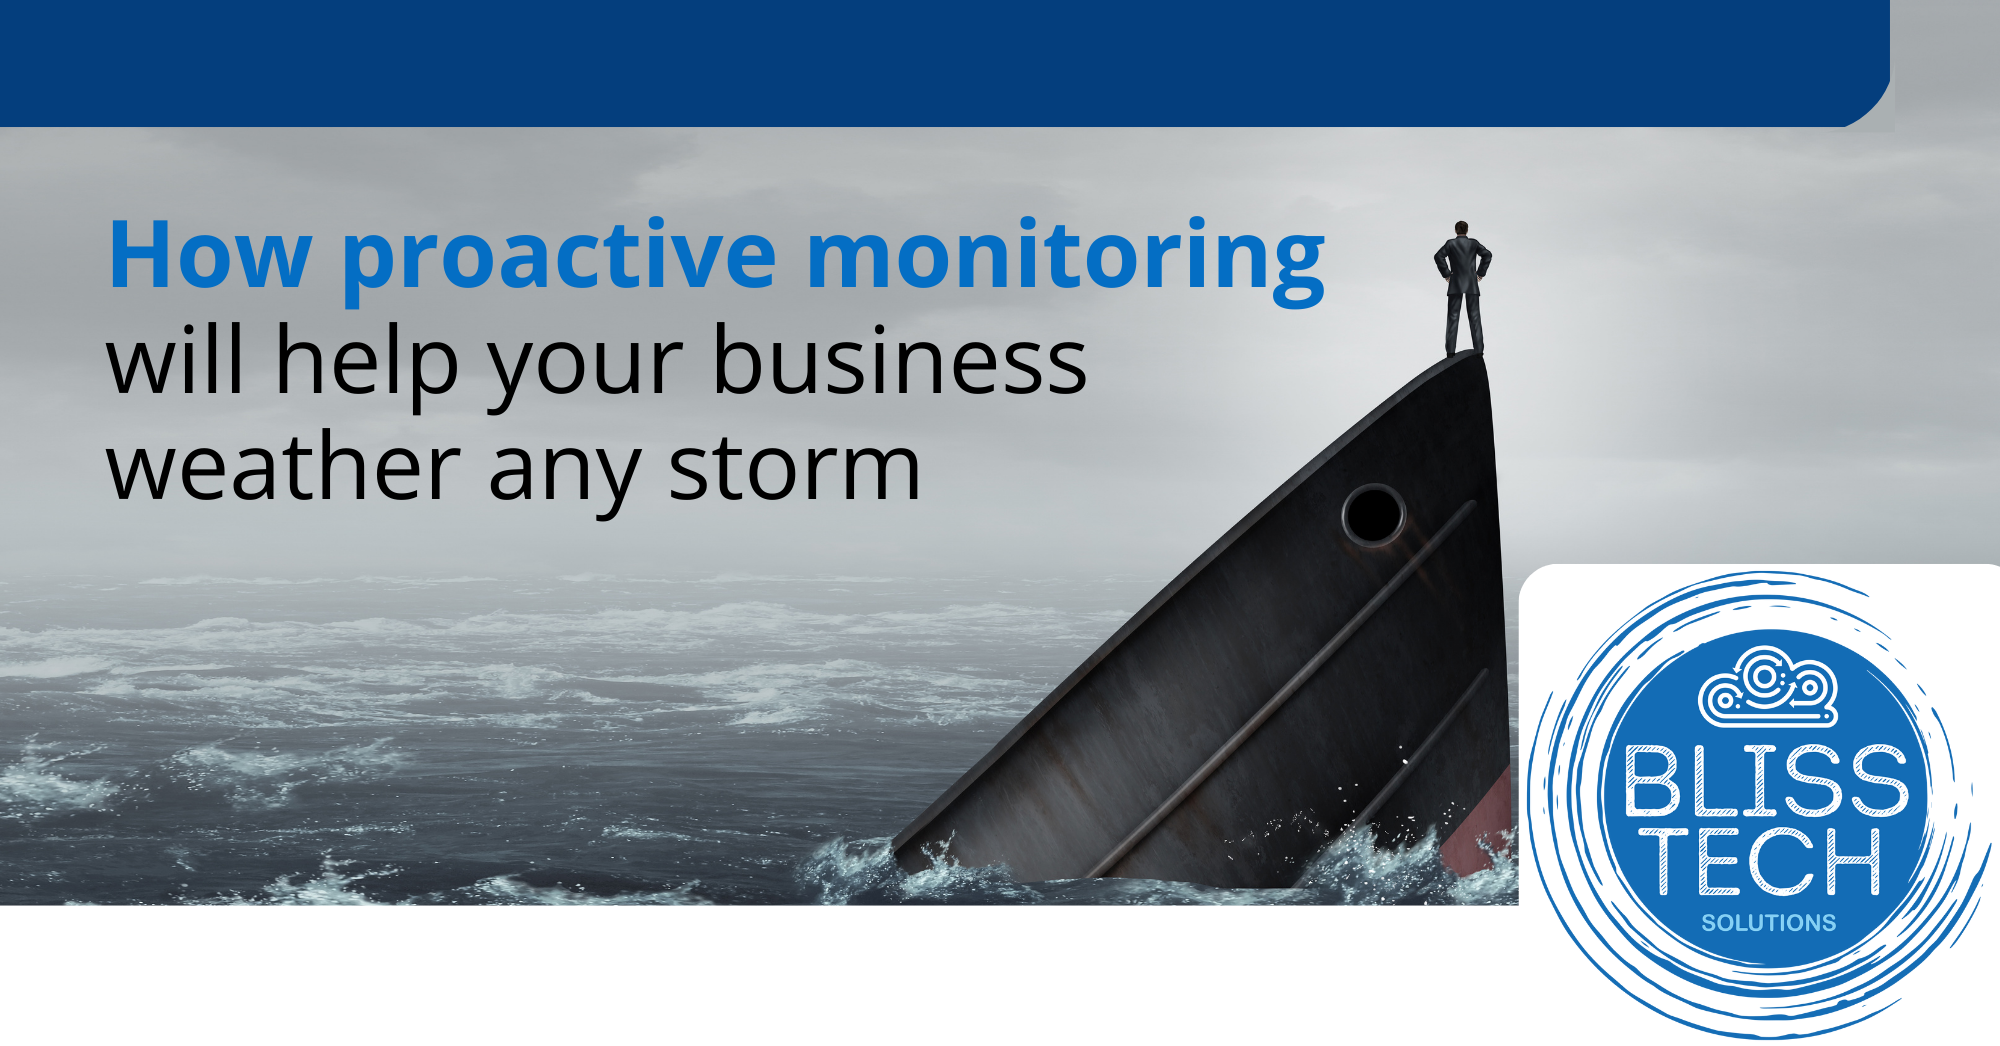 What is Proactive Monitoring and how can it protect your business?